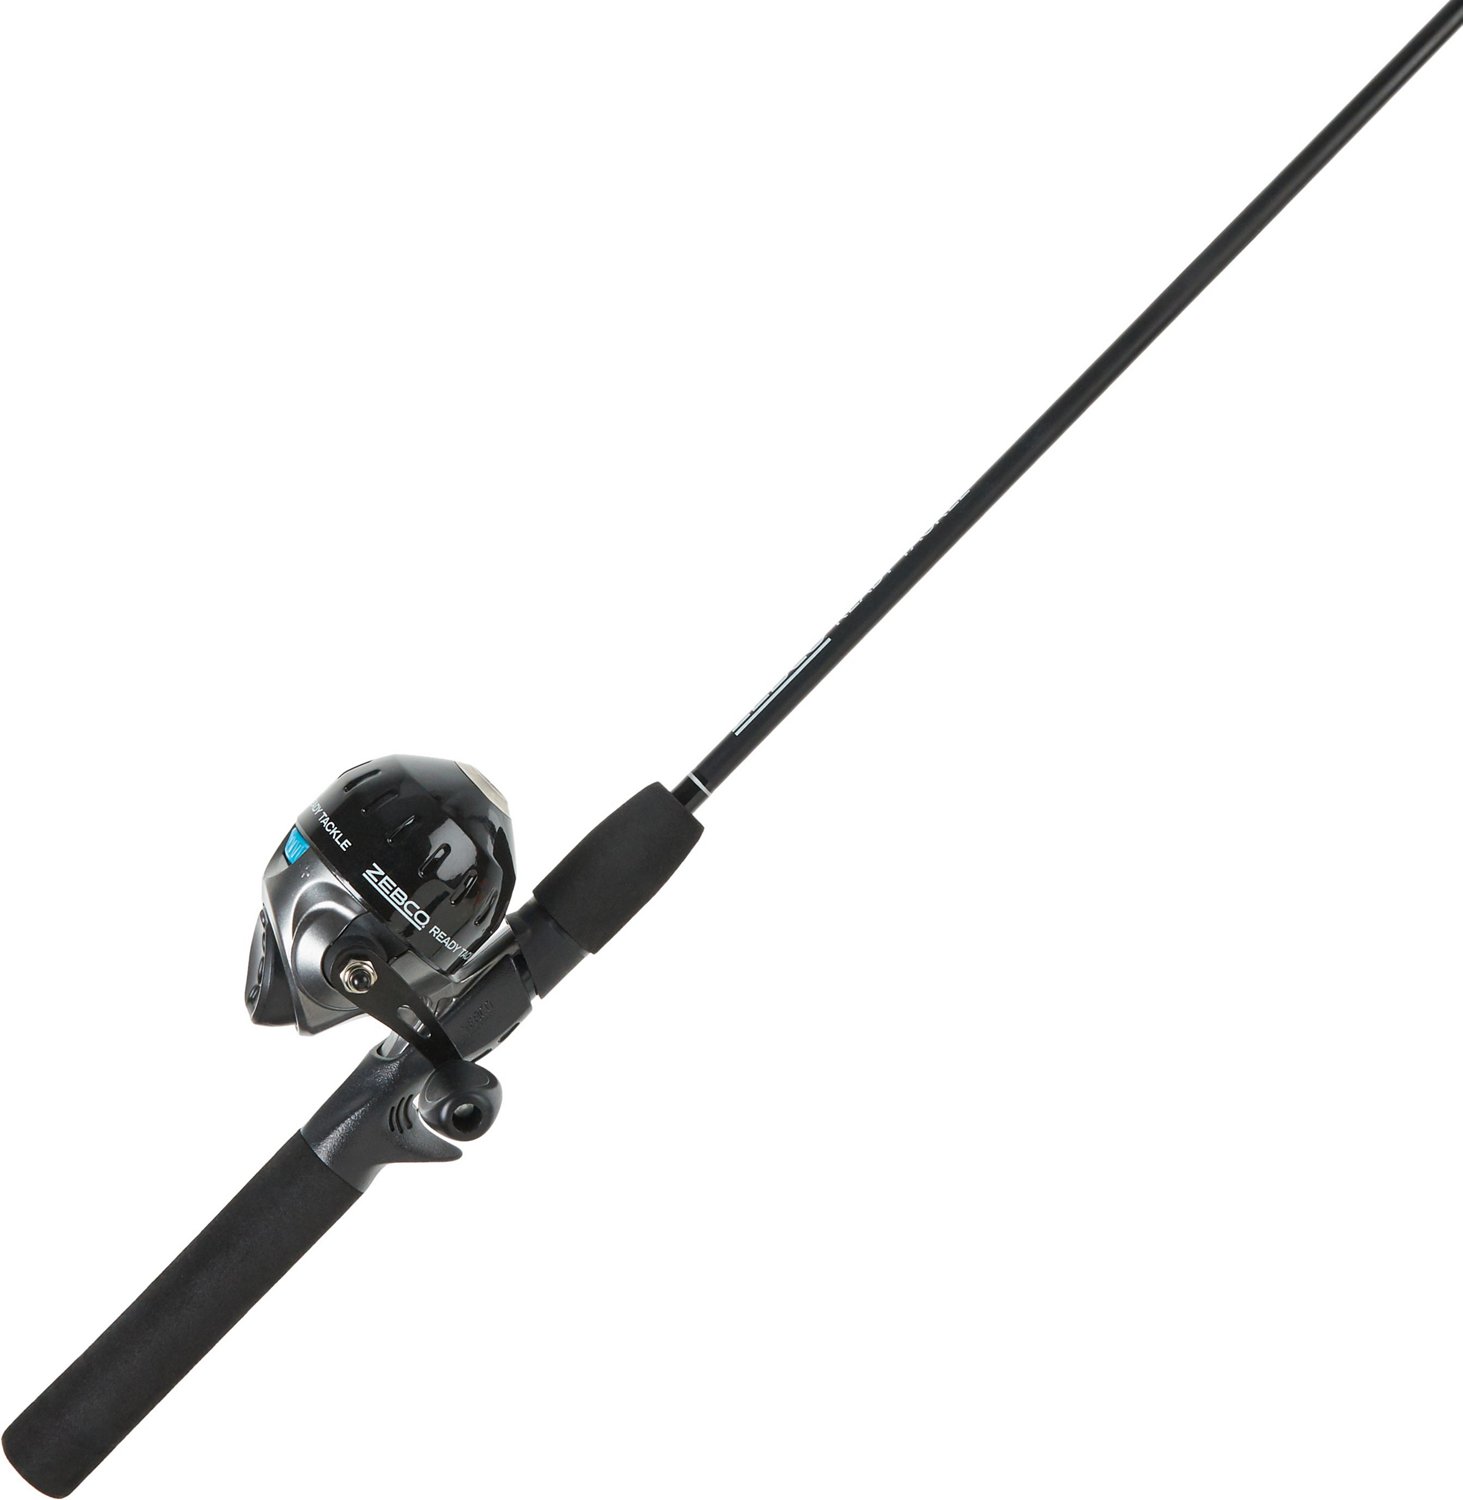 Zebco Ready Tackle 5 ft 6 in ML Freshwater Spincast Rod and Reel Combo                                                           - view number 1 selected